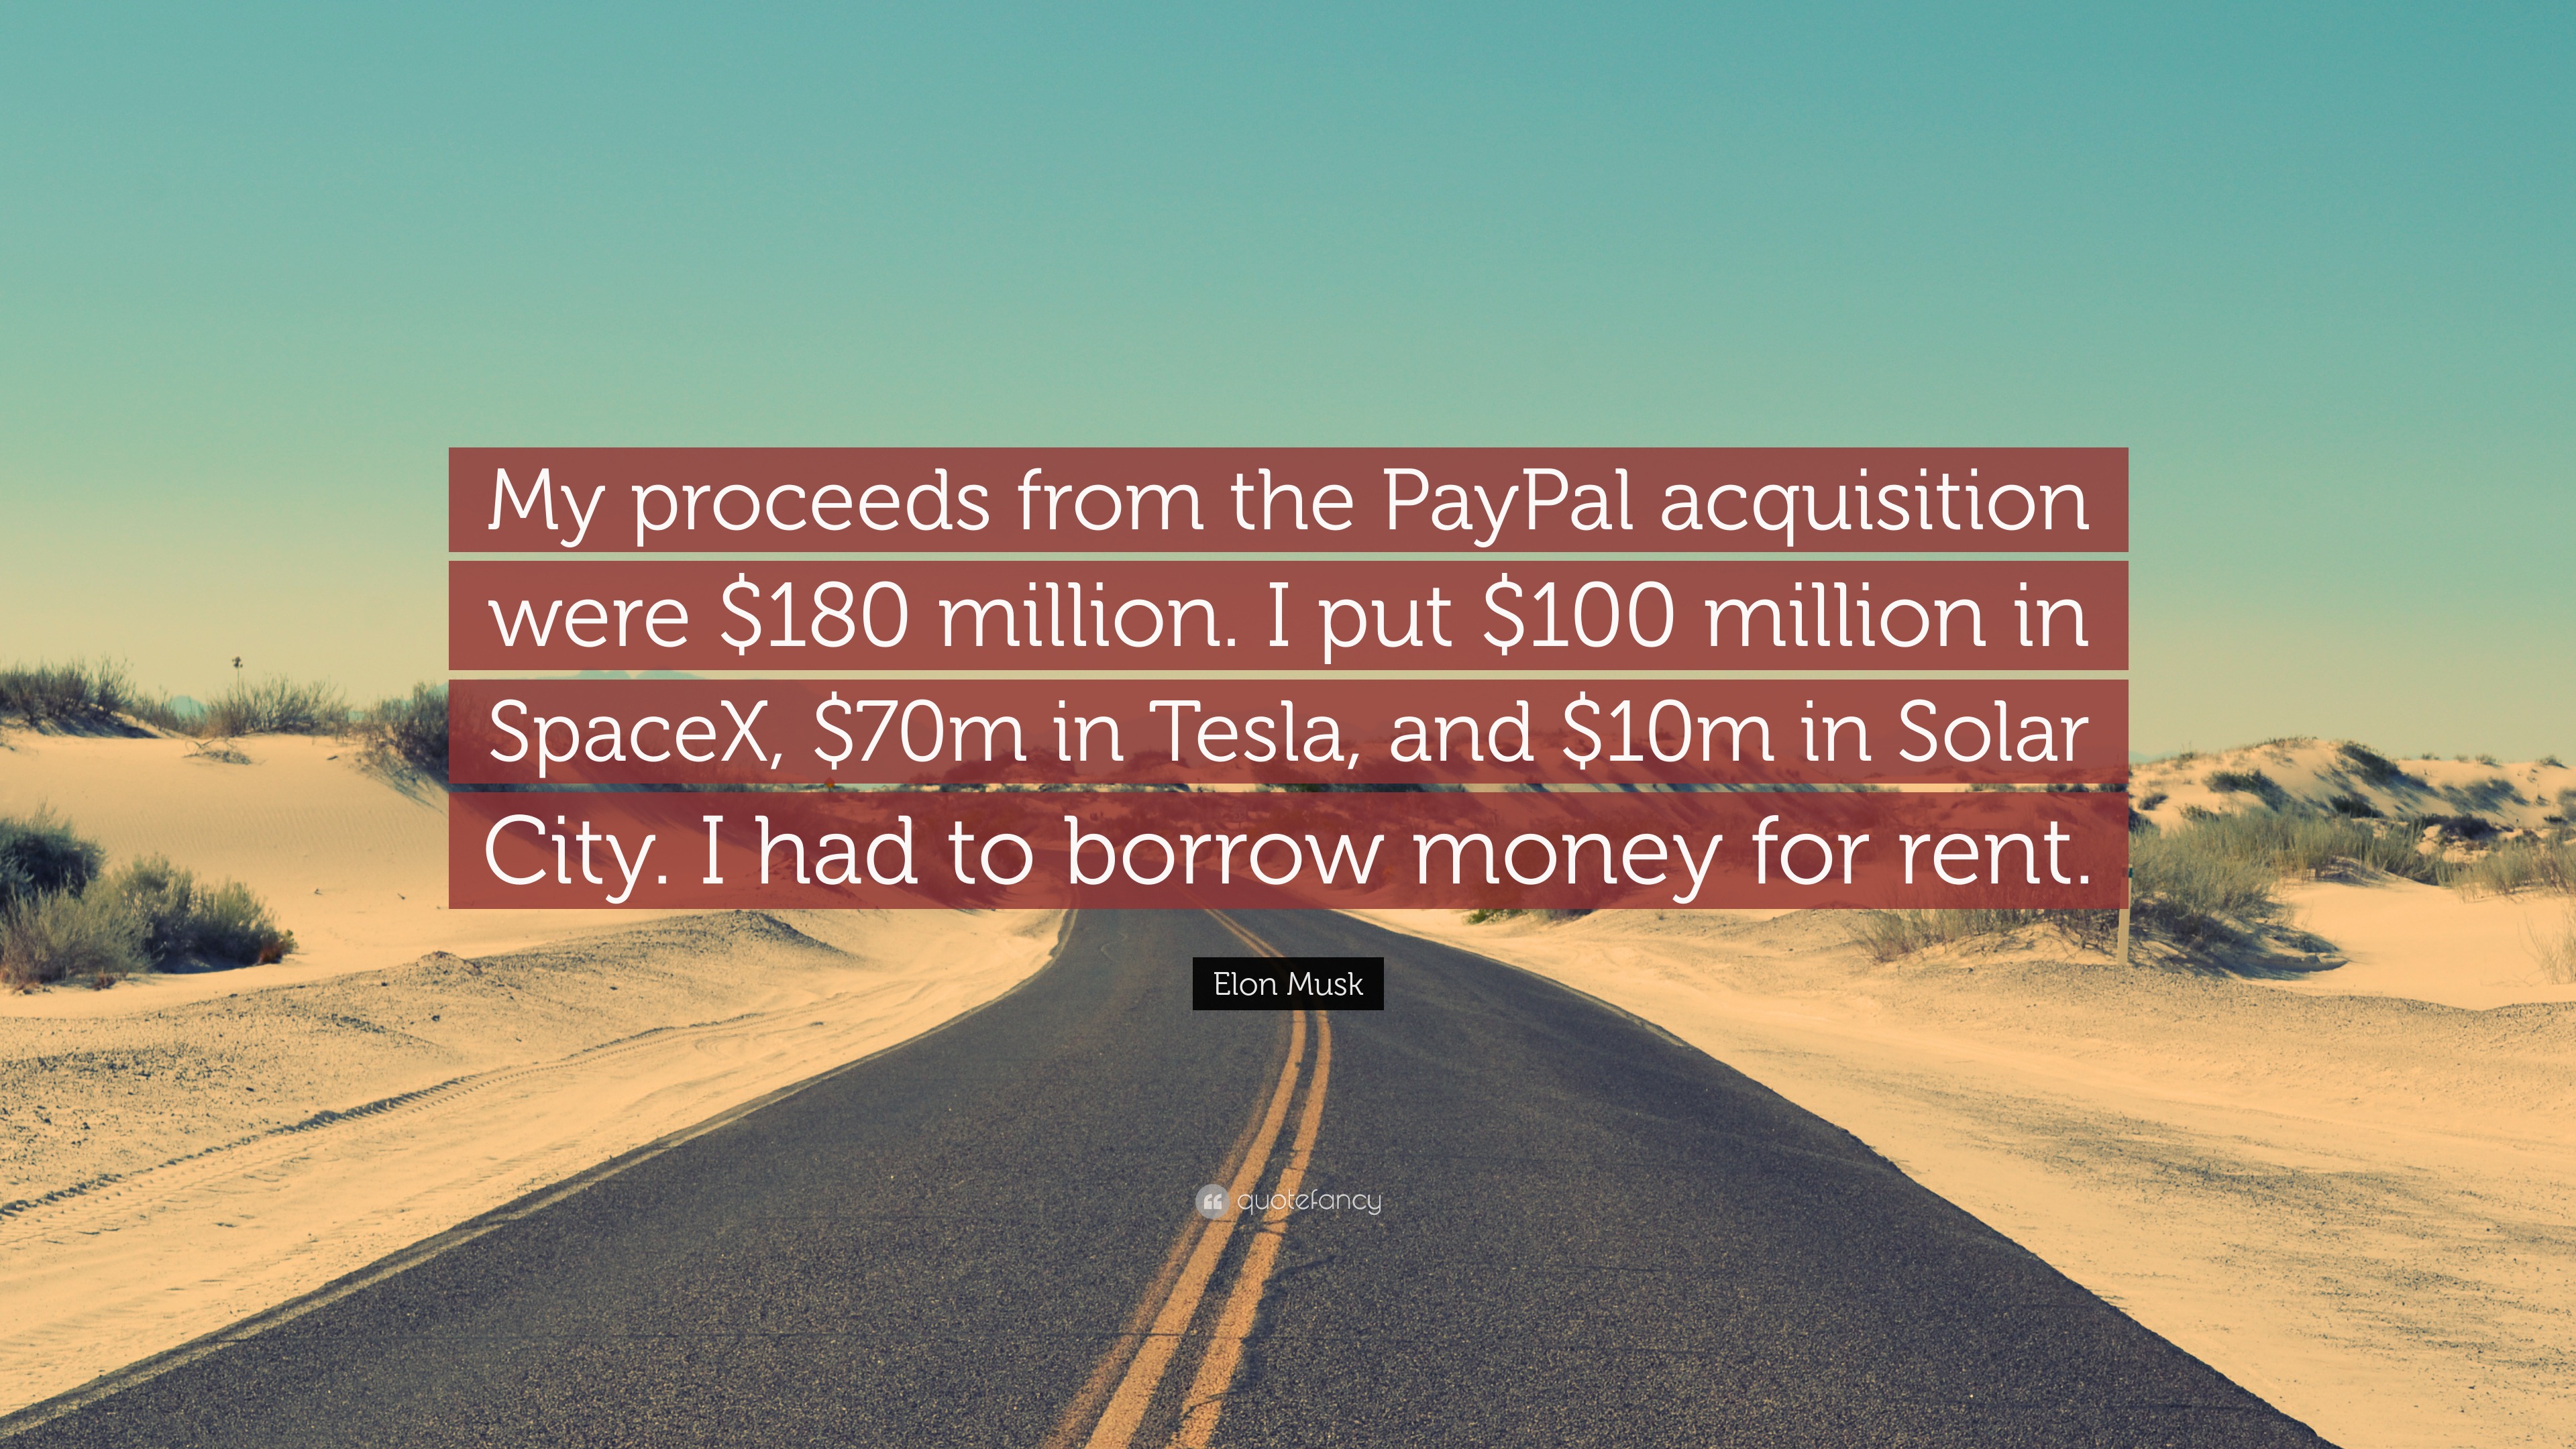 elon musk paypal equity stake